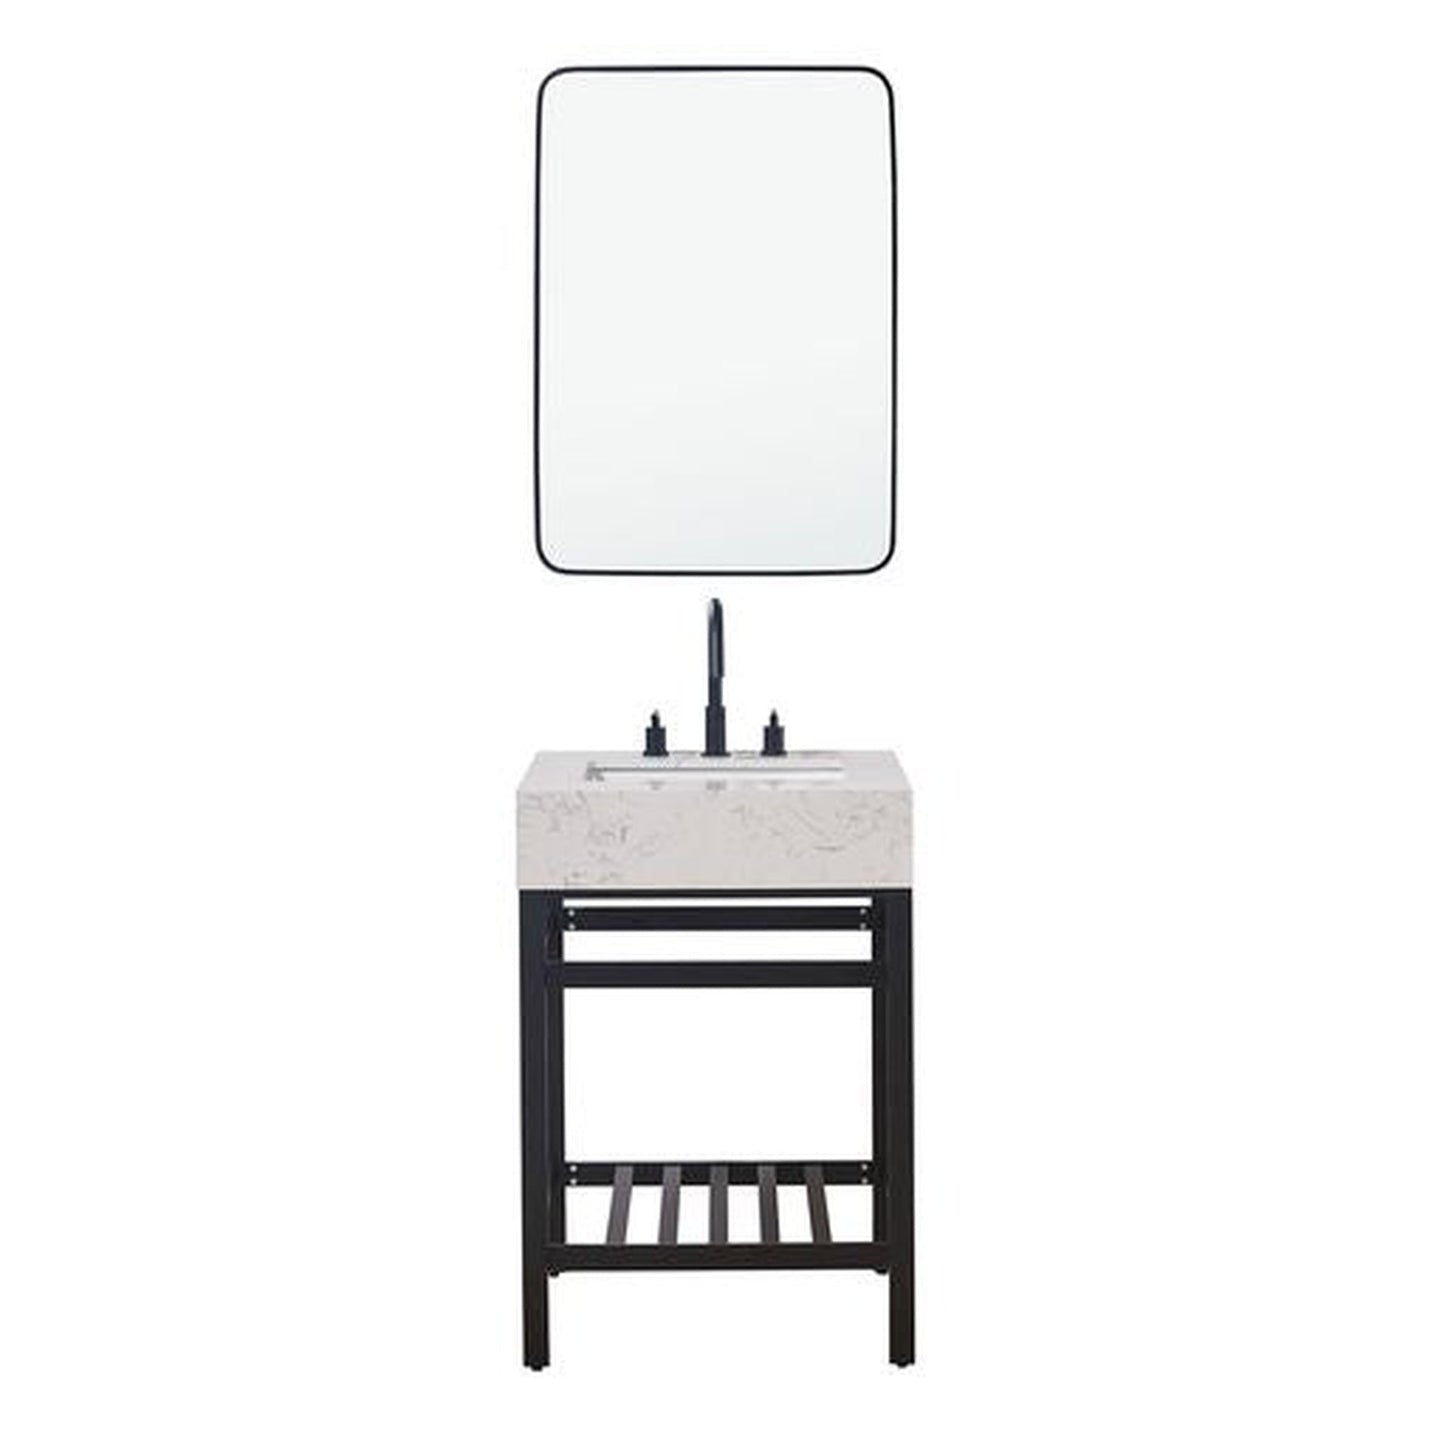 Altair Merano 24" Matte Black Single Stainless Steel Bathroom Vanity Set Console With Mirror, Aosta White Stone Top, Single Rectangular Undermount Ceramic Sink, and Safety Overflow Hole